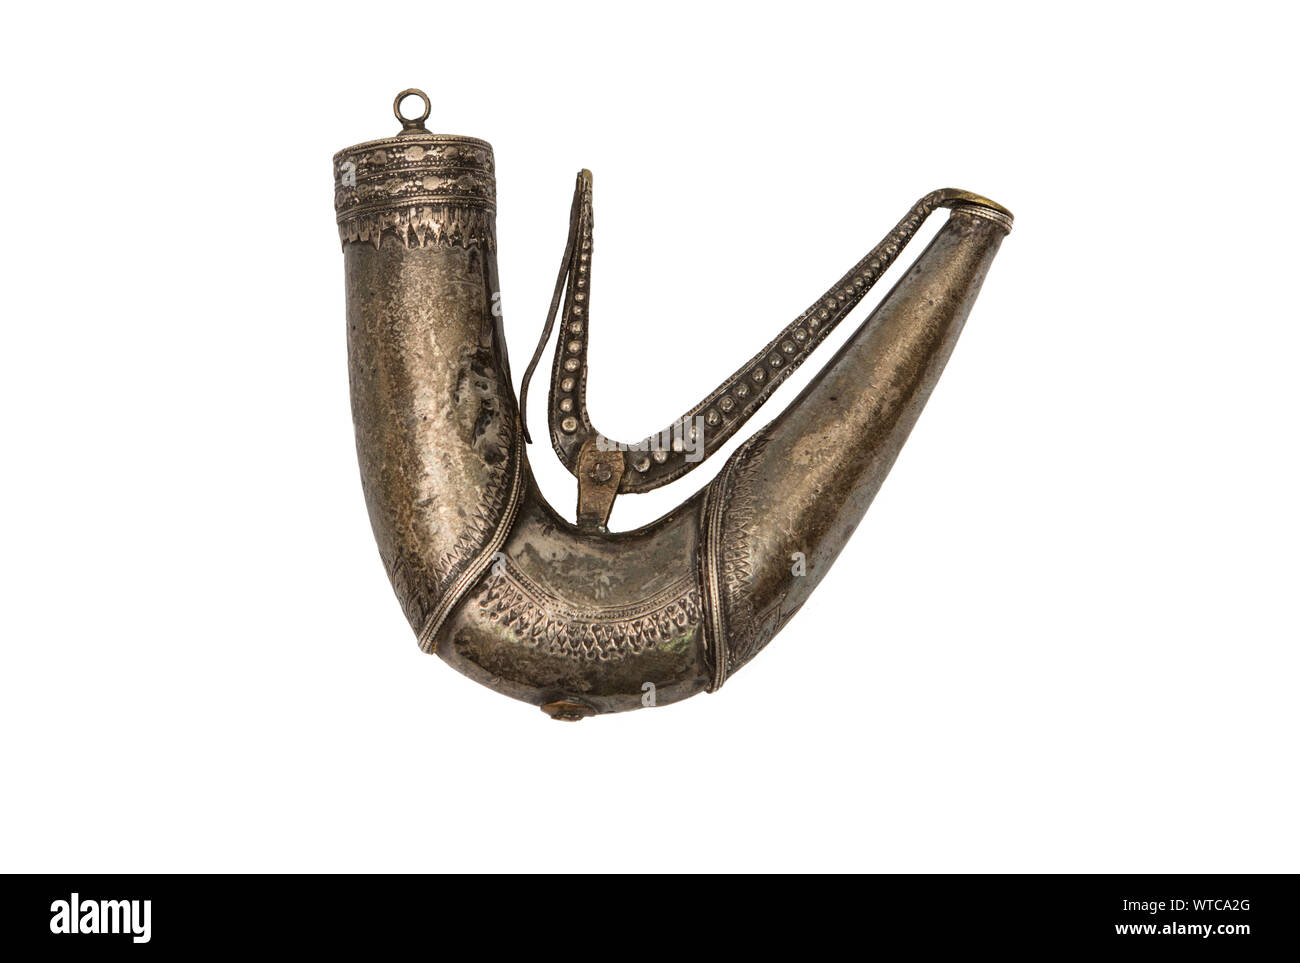 Mid 19th century silver gunpowder flask or charger from Southern Arabia. Finely chiseled surface, with moving lever for the mouth opening. Stock Photo